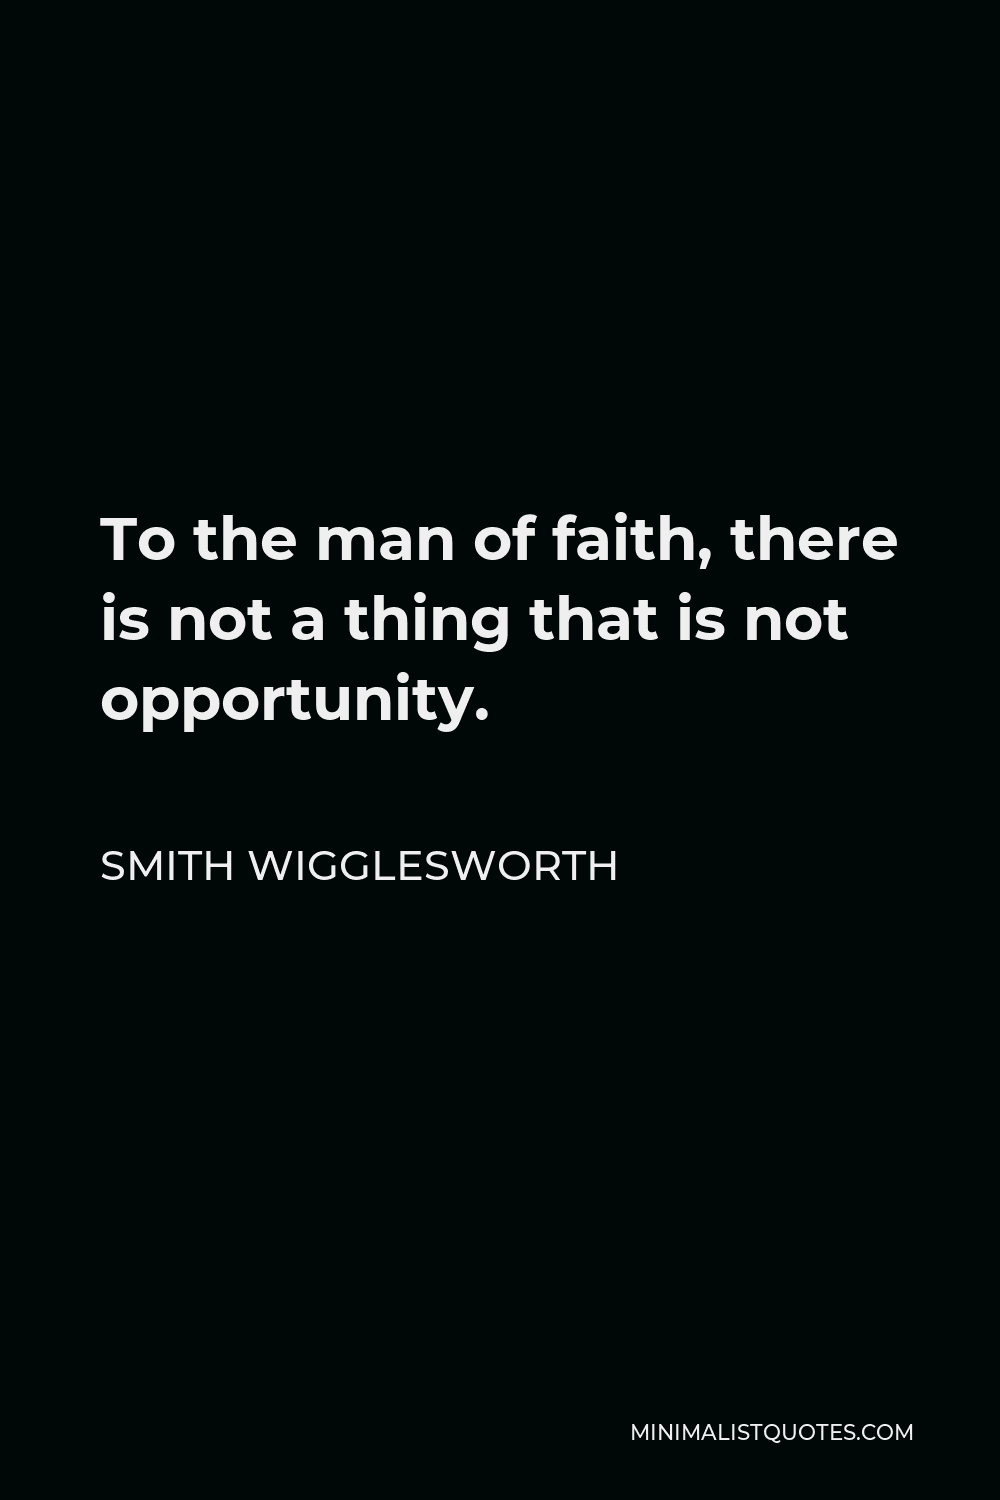 Smith Wigglesworth Quote - To the man of faith, there is not a thing that is not opportunity.